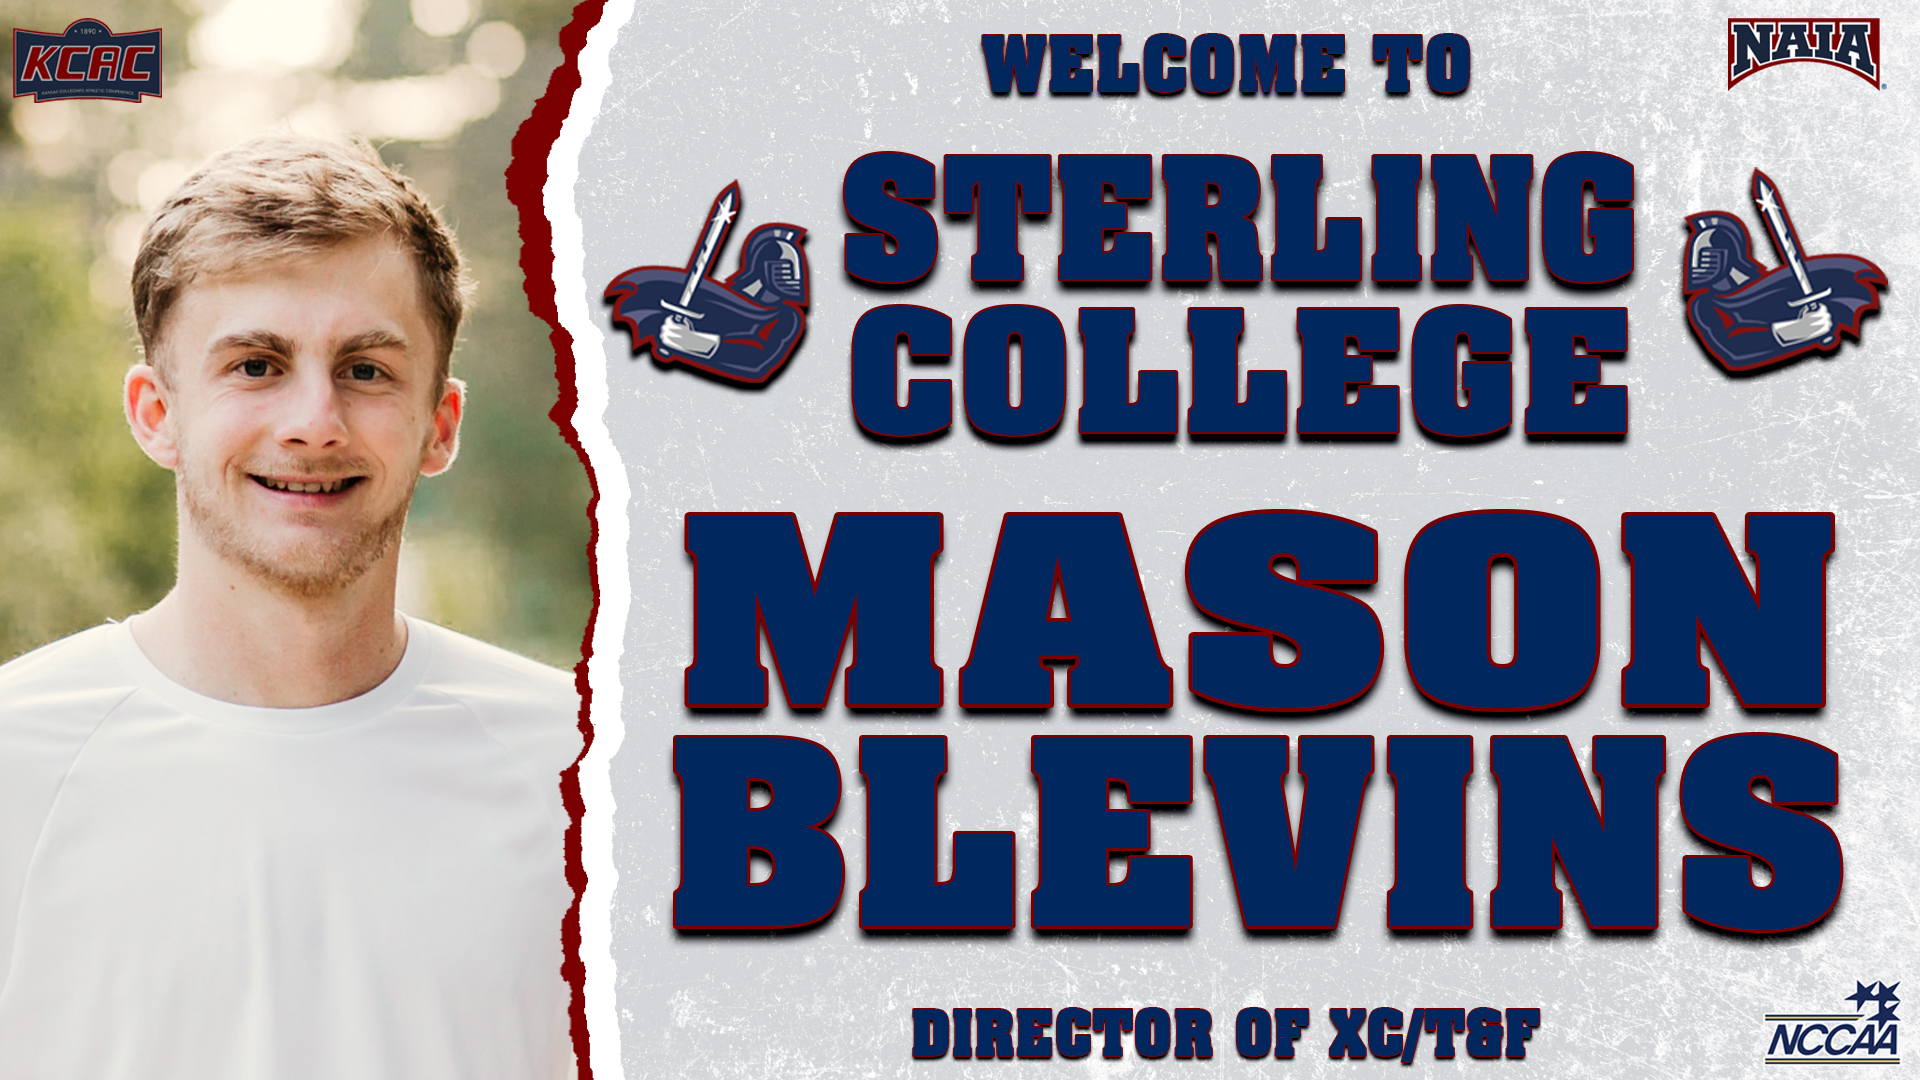 Warrior Athletics Announces Blevins as Director of Cross Country and Track